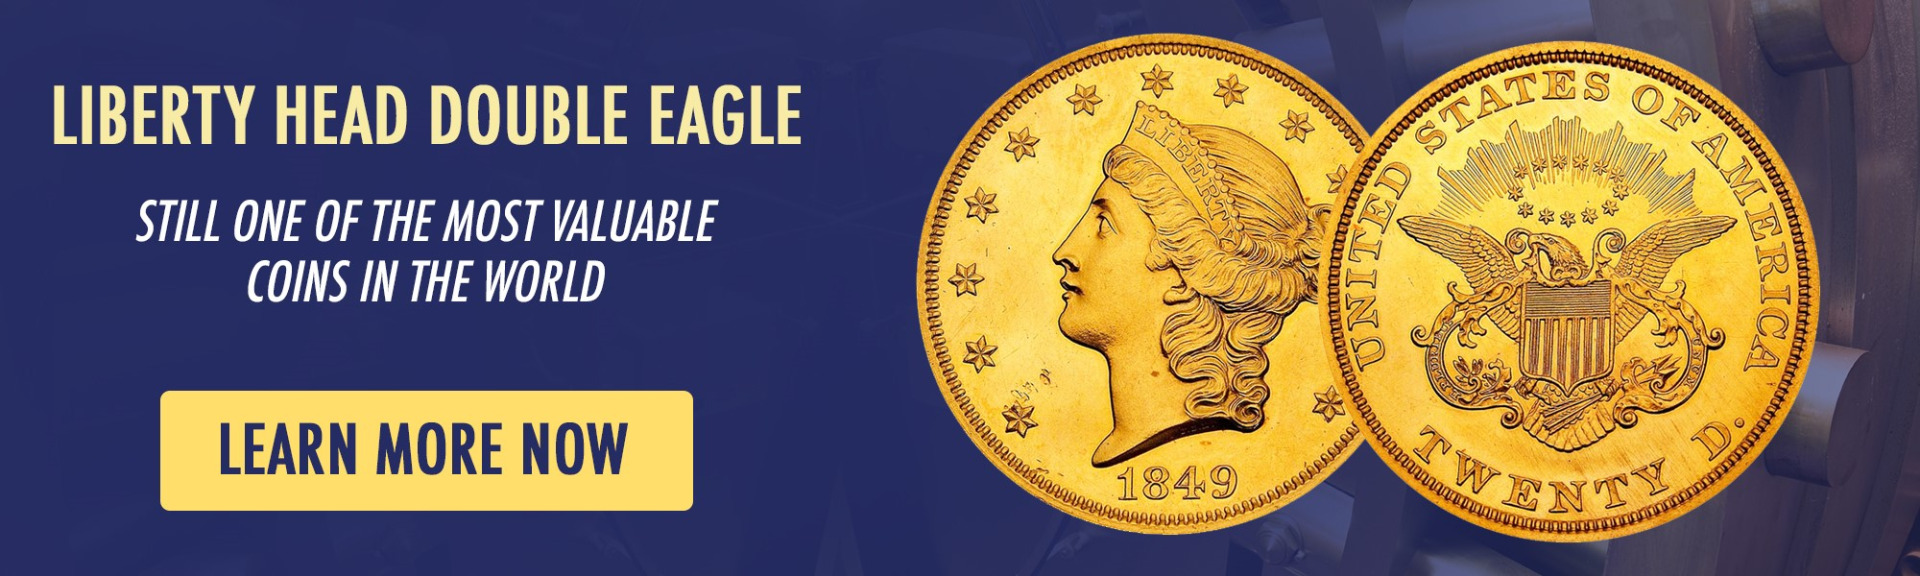 Valuing the Liberty Head Double Eagle